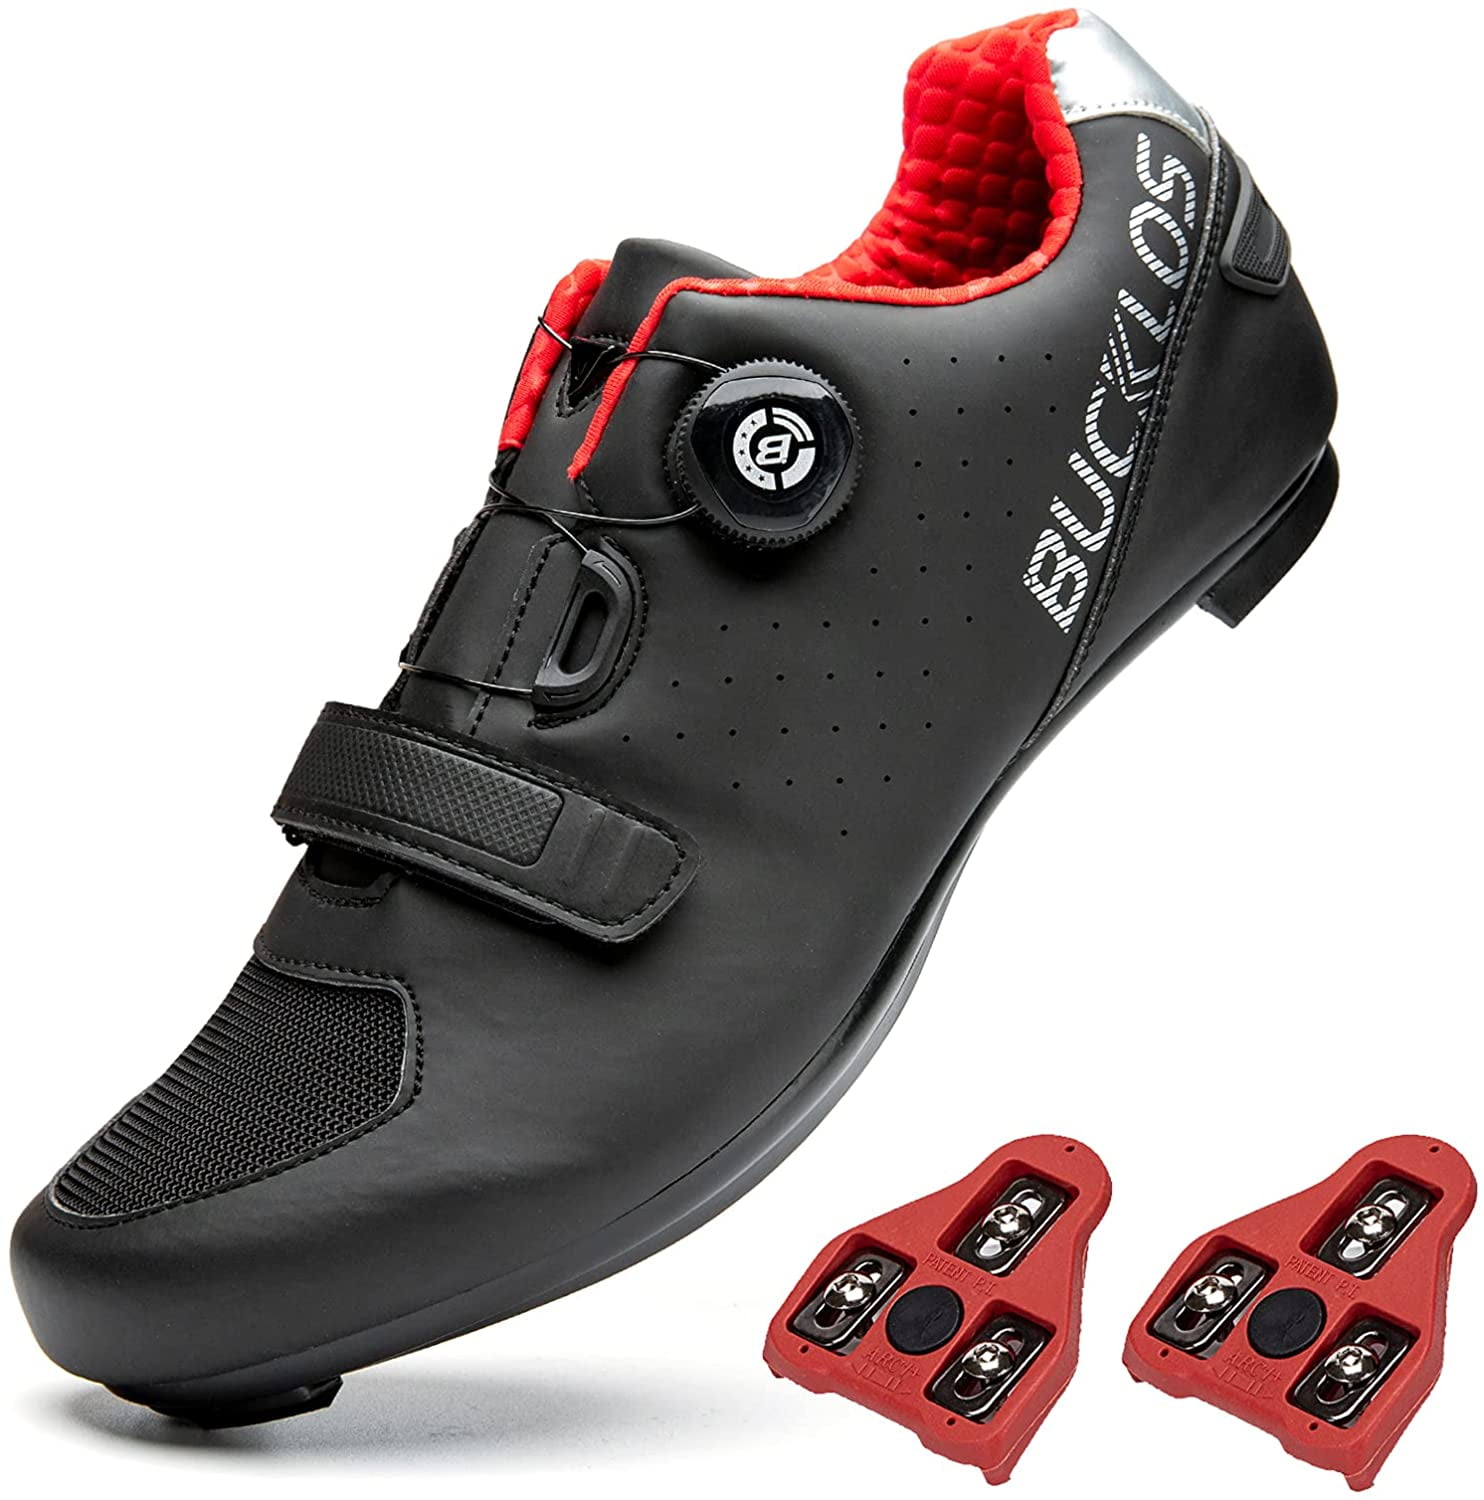 Compatible with Delta Cleats SPD Mountain Road Bike Shoes Indoor Outdoor Womens Men's Cycling Shoes 